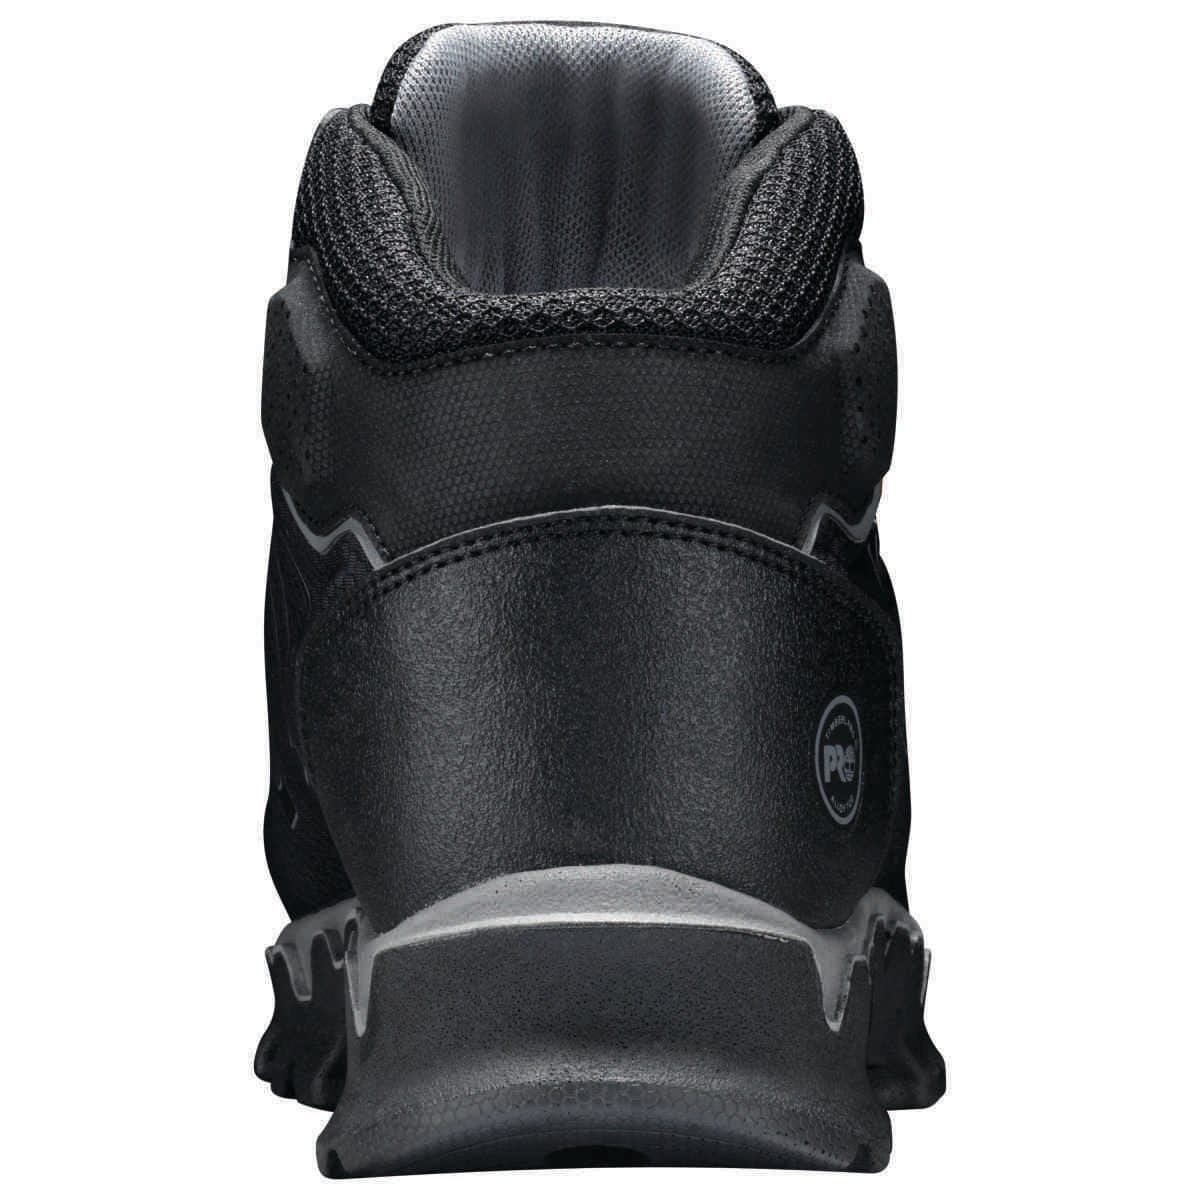 Timberland PRO Powertrain Mid-Height Work Shoes